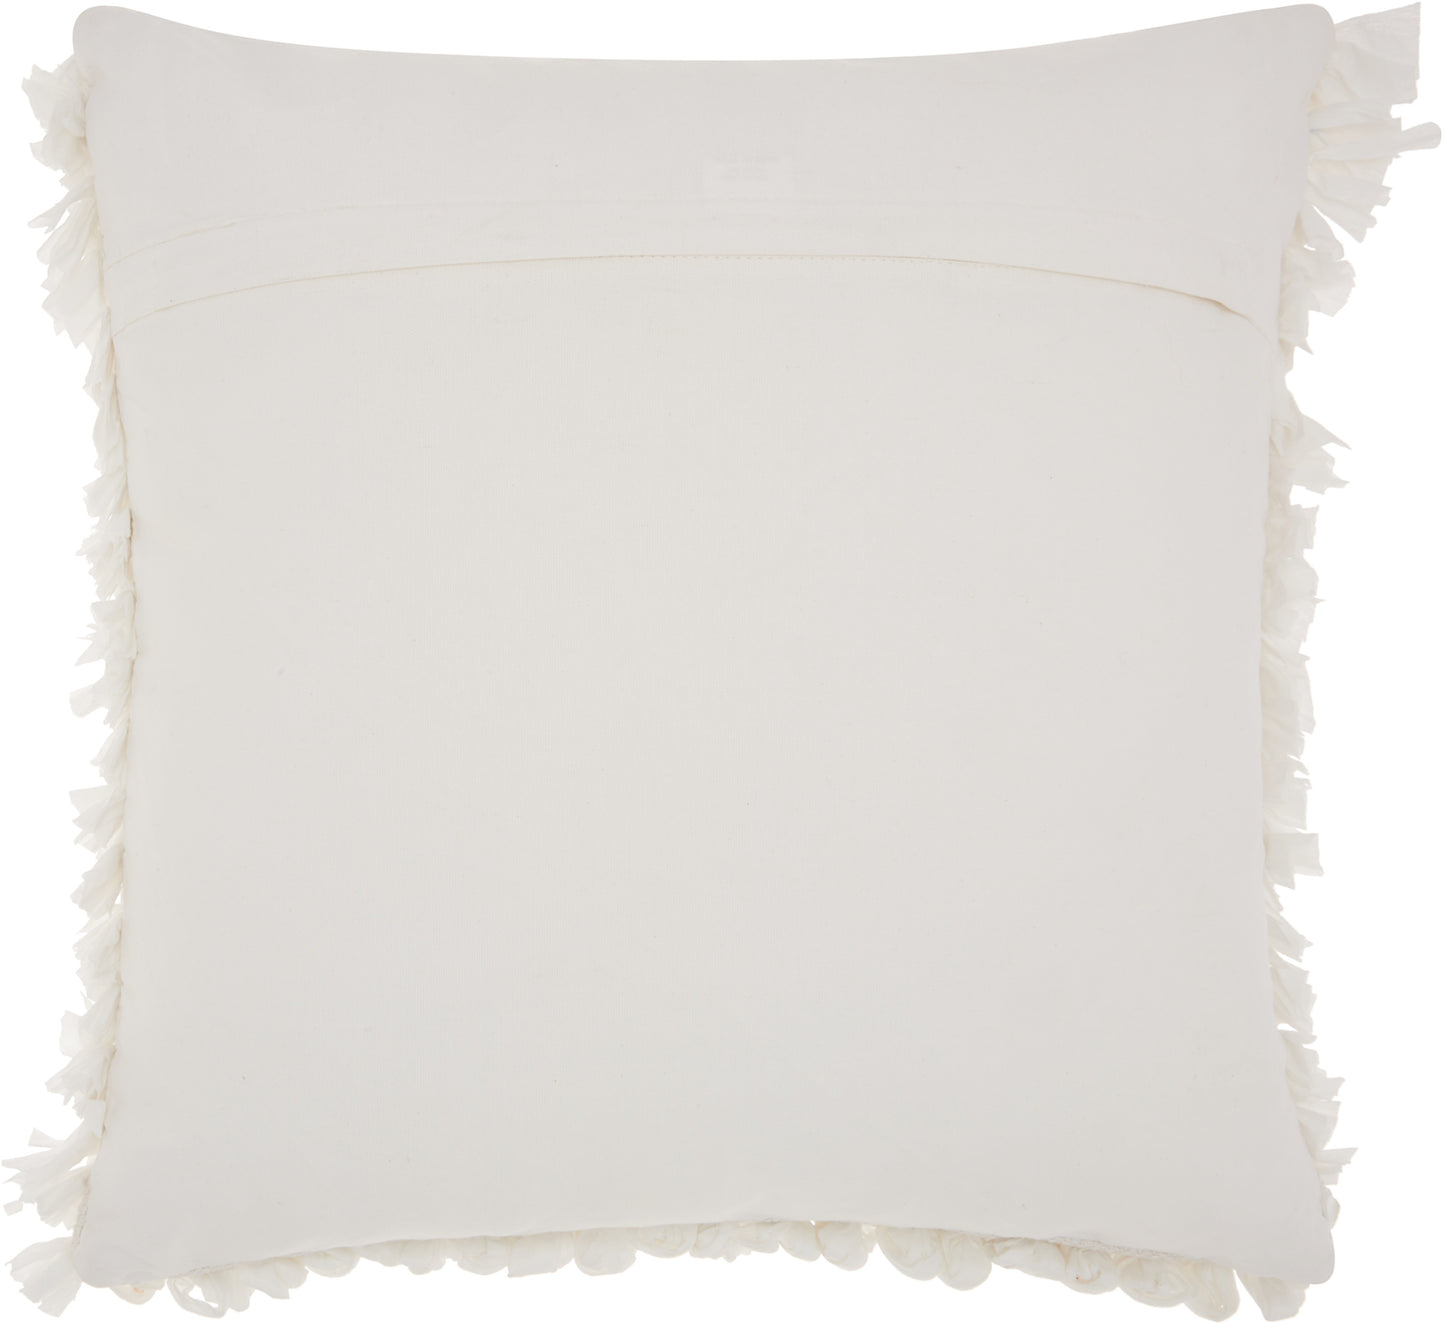 Shag DL058 Synthetic Blend Paper Loop Shag Throw Pillow From Mina Victory By Nourison Rugs